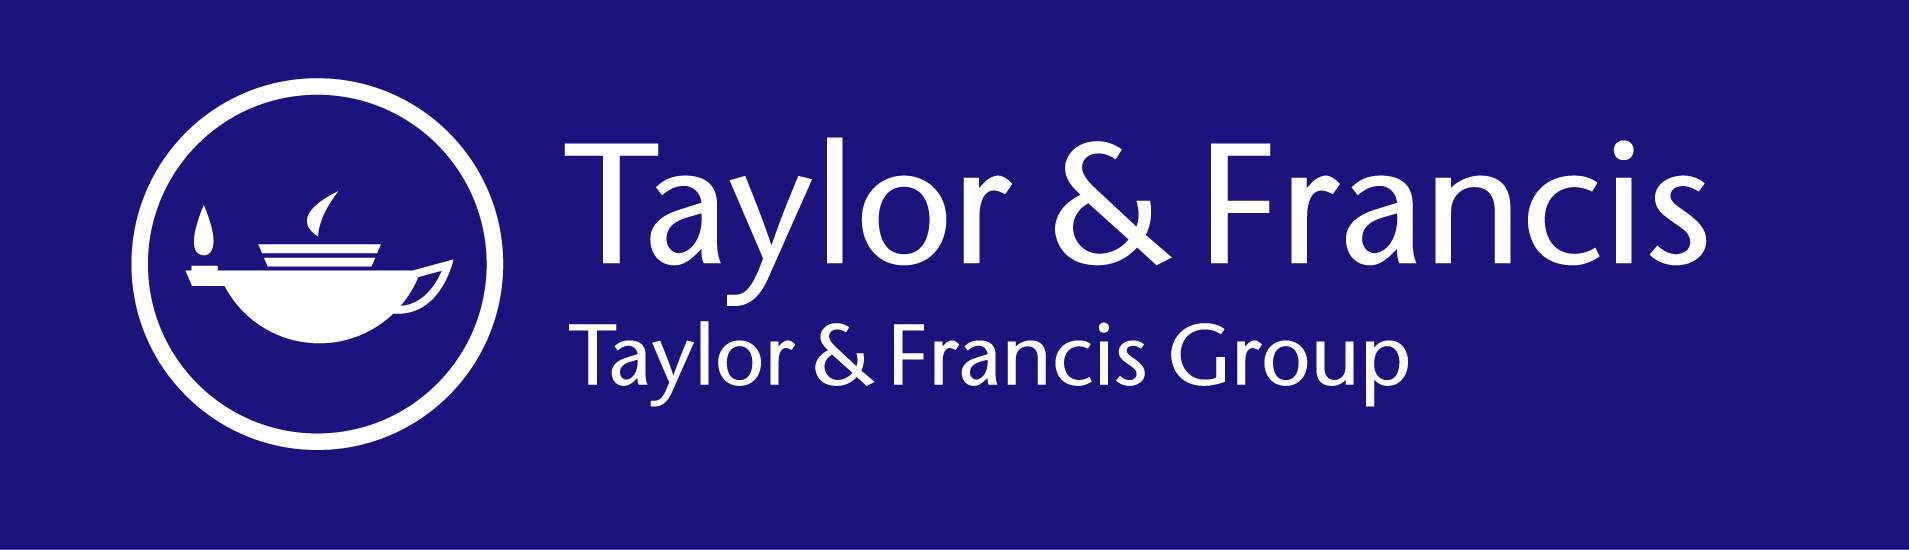 Taylor & Francis Online